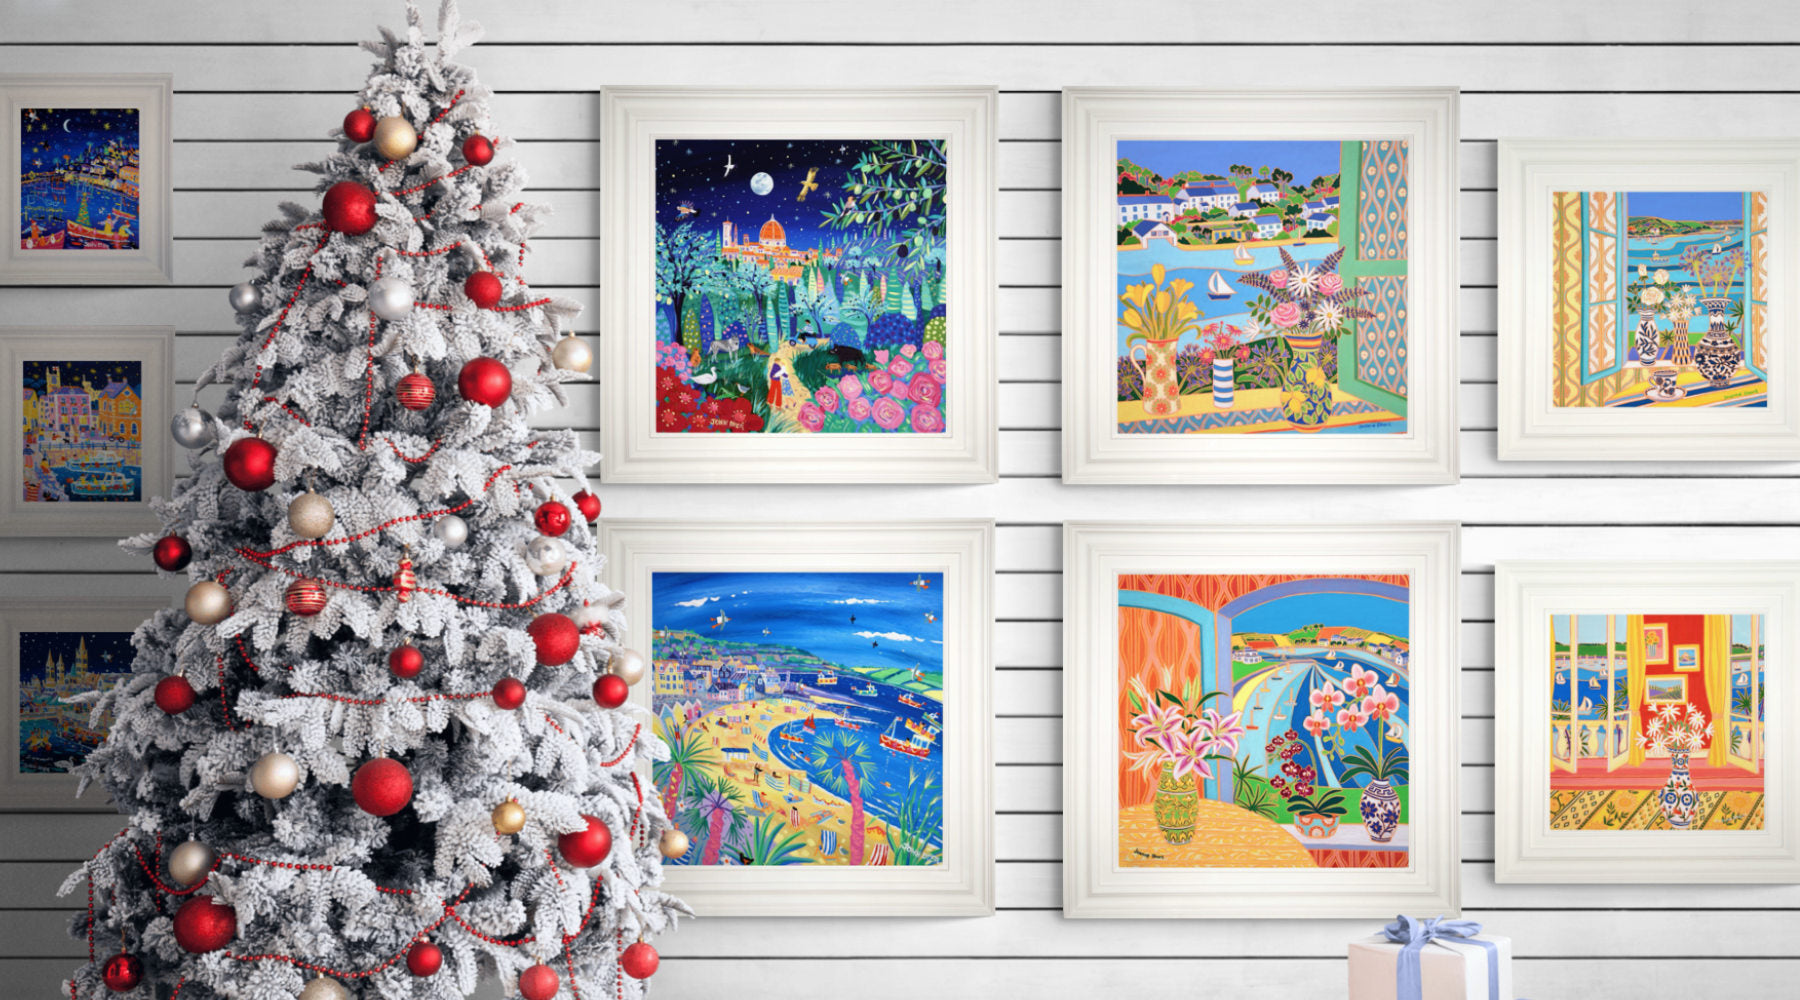 New paintings on sale at the John Dyer Gallery Christmas exhibition